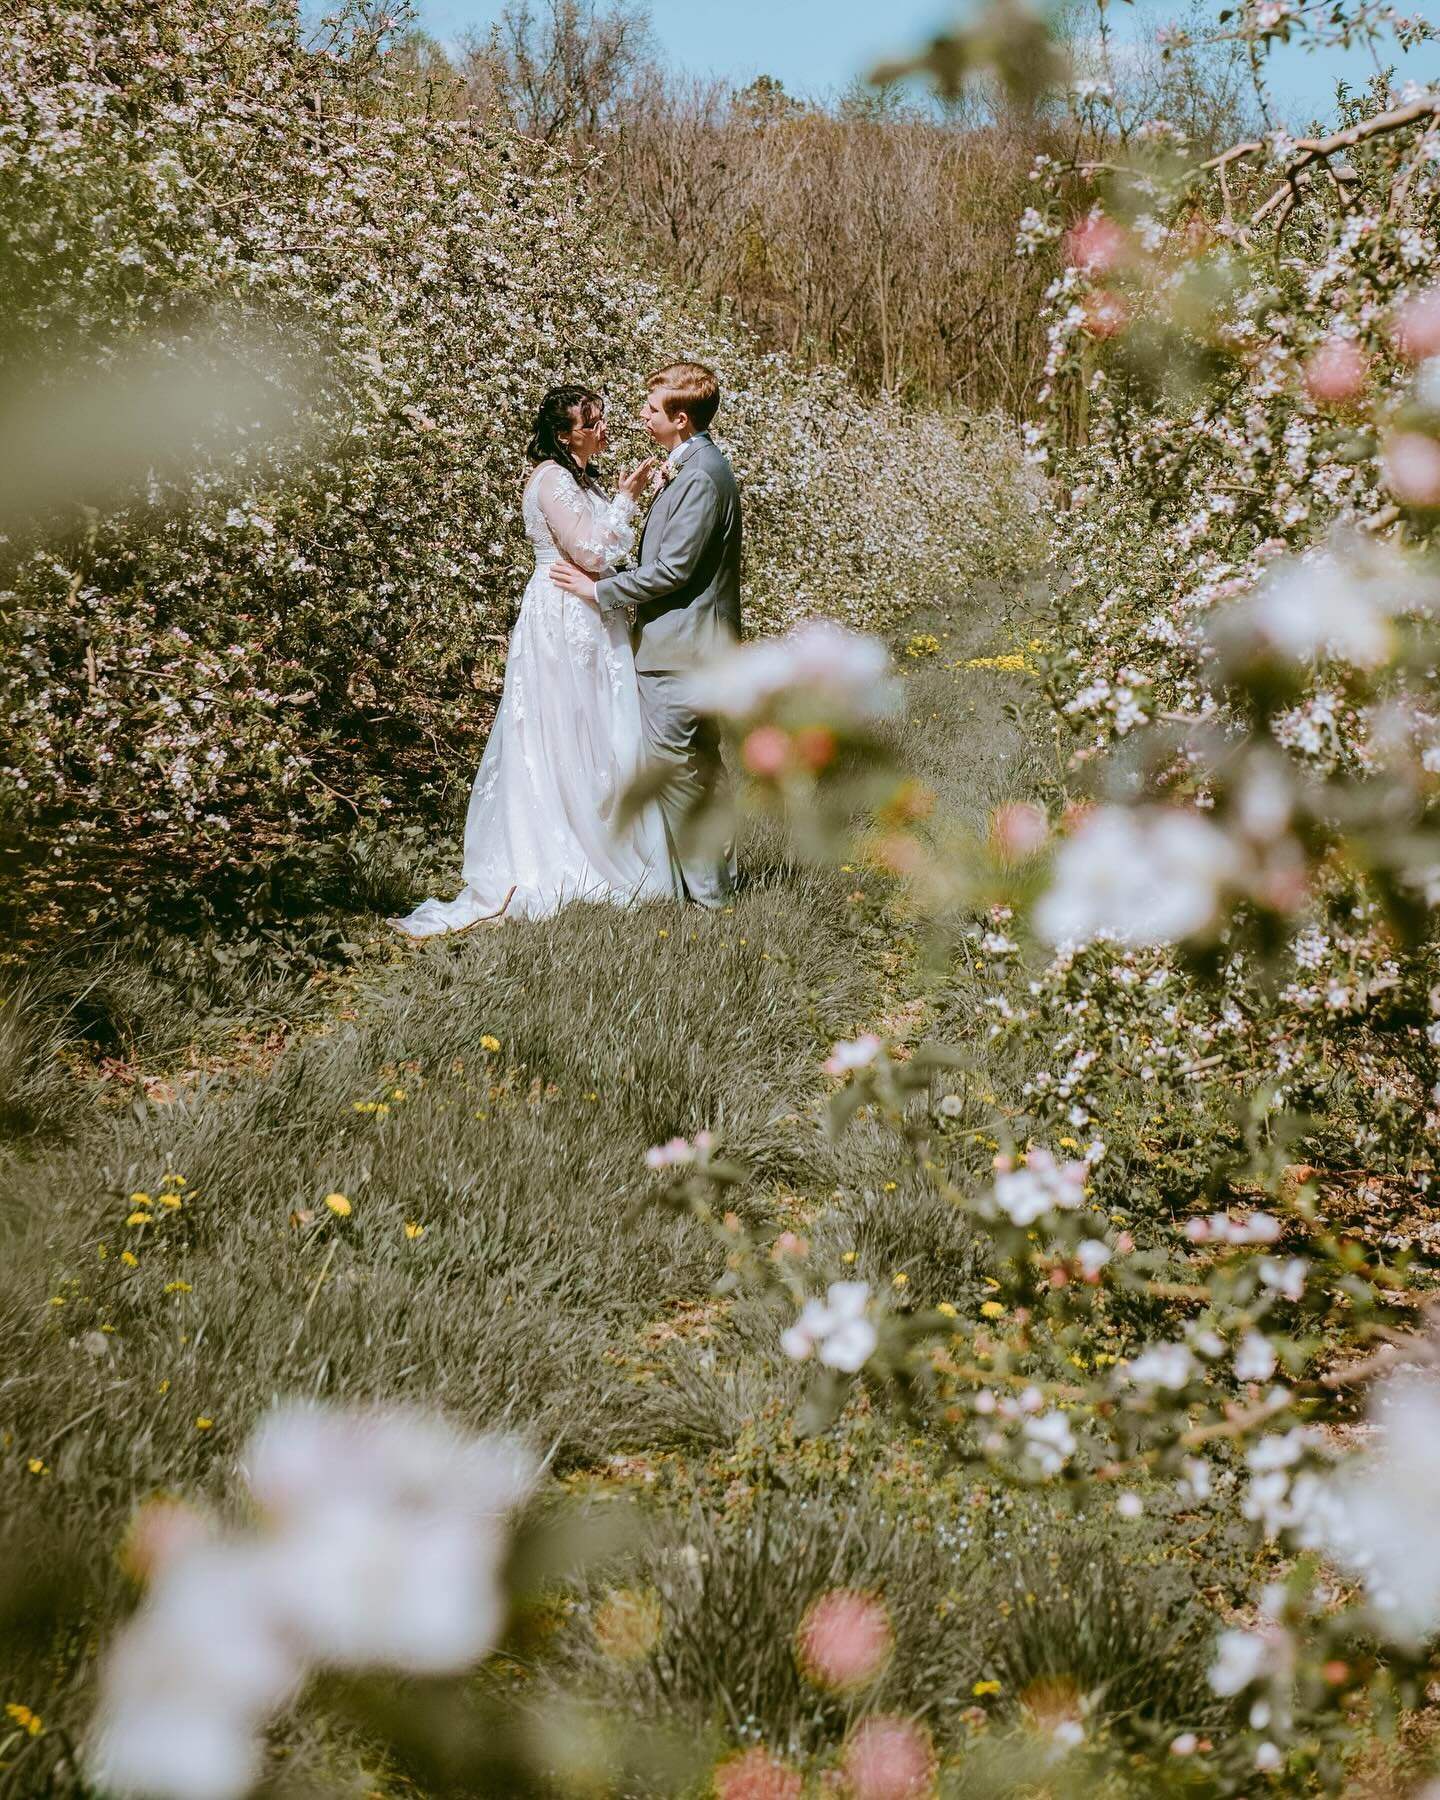 Spring has sprung!! And these apple blossoms from Izzy &amp; Sam&rsquo;s wedding are the juicy sweet treat we never knew we needed 😍

Planner @lauraelizabethweddings 
Photographer @popofmolly_photography
Venue @showaltersgreenhousevenue
Florist @tam